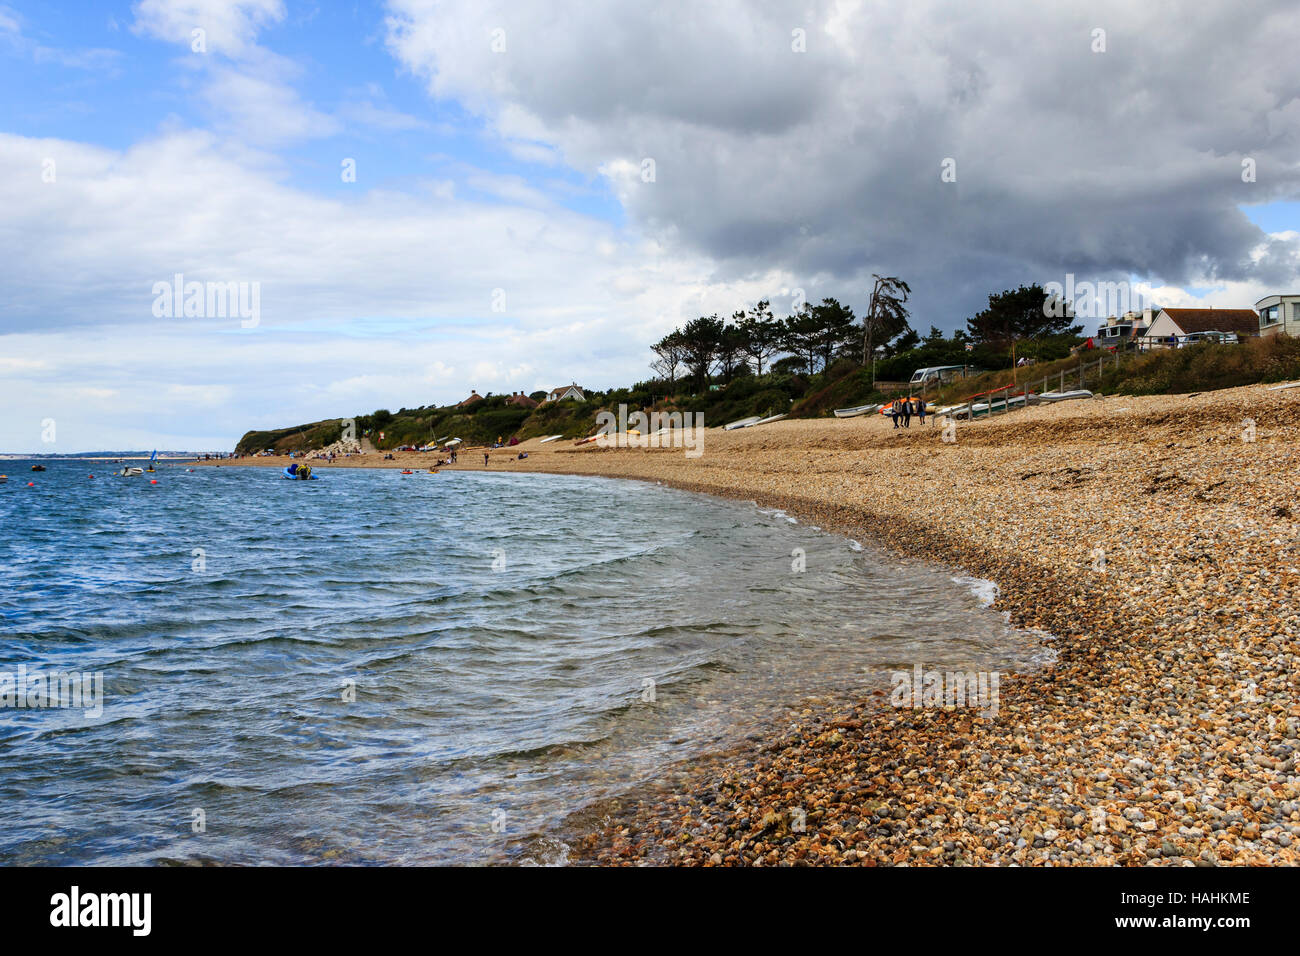 Looking west along the shingle beach at Ringstead Bay, Dorset, England, UK Stock Photo